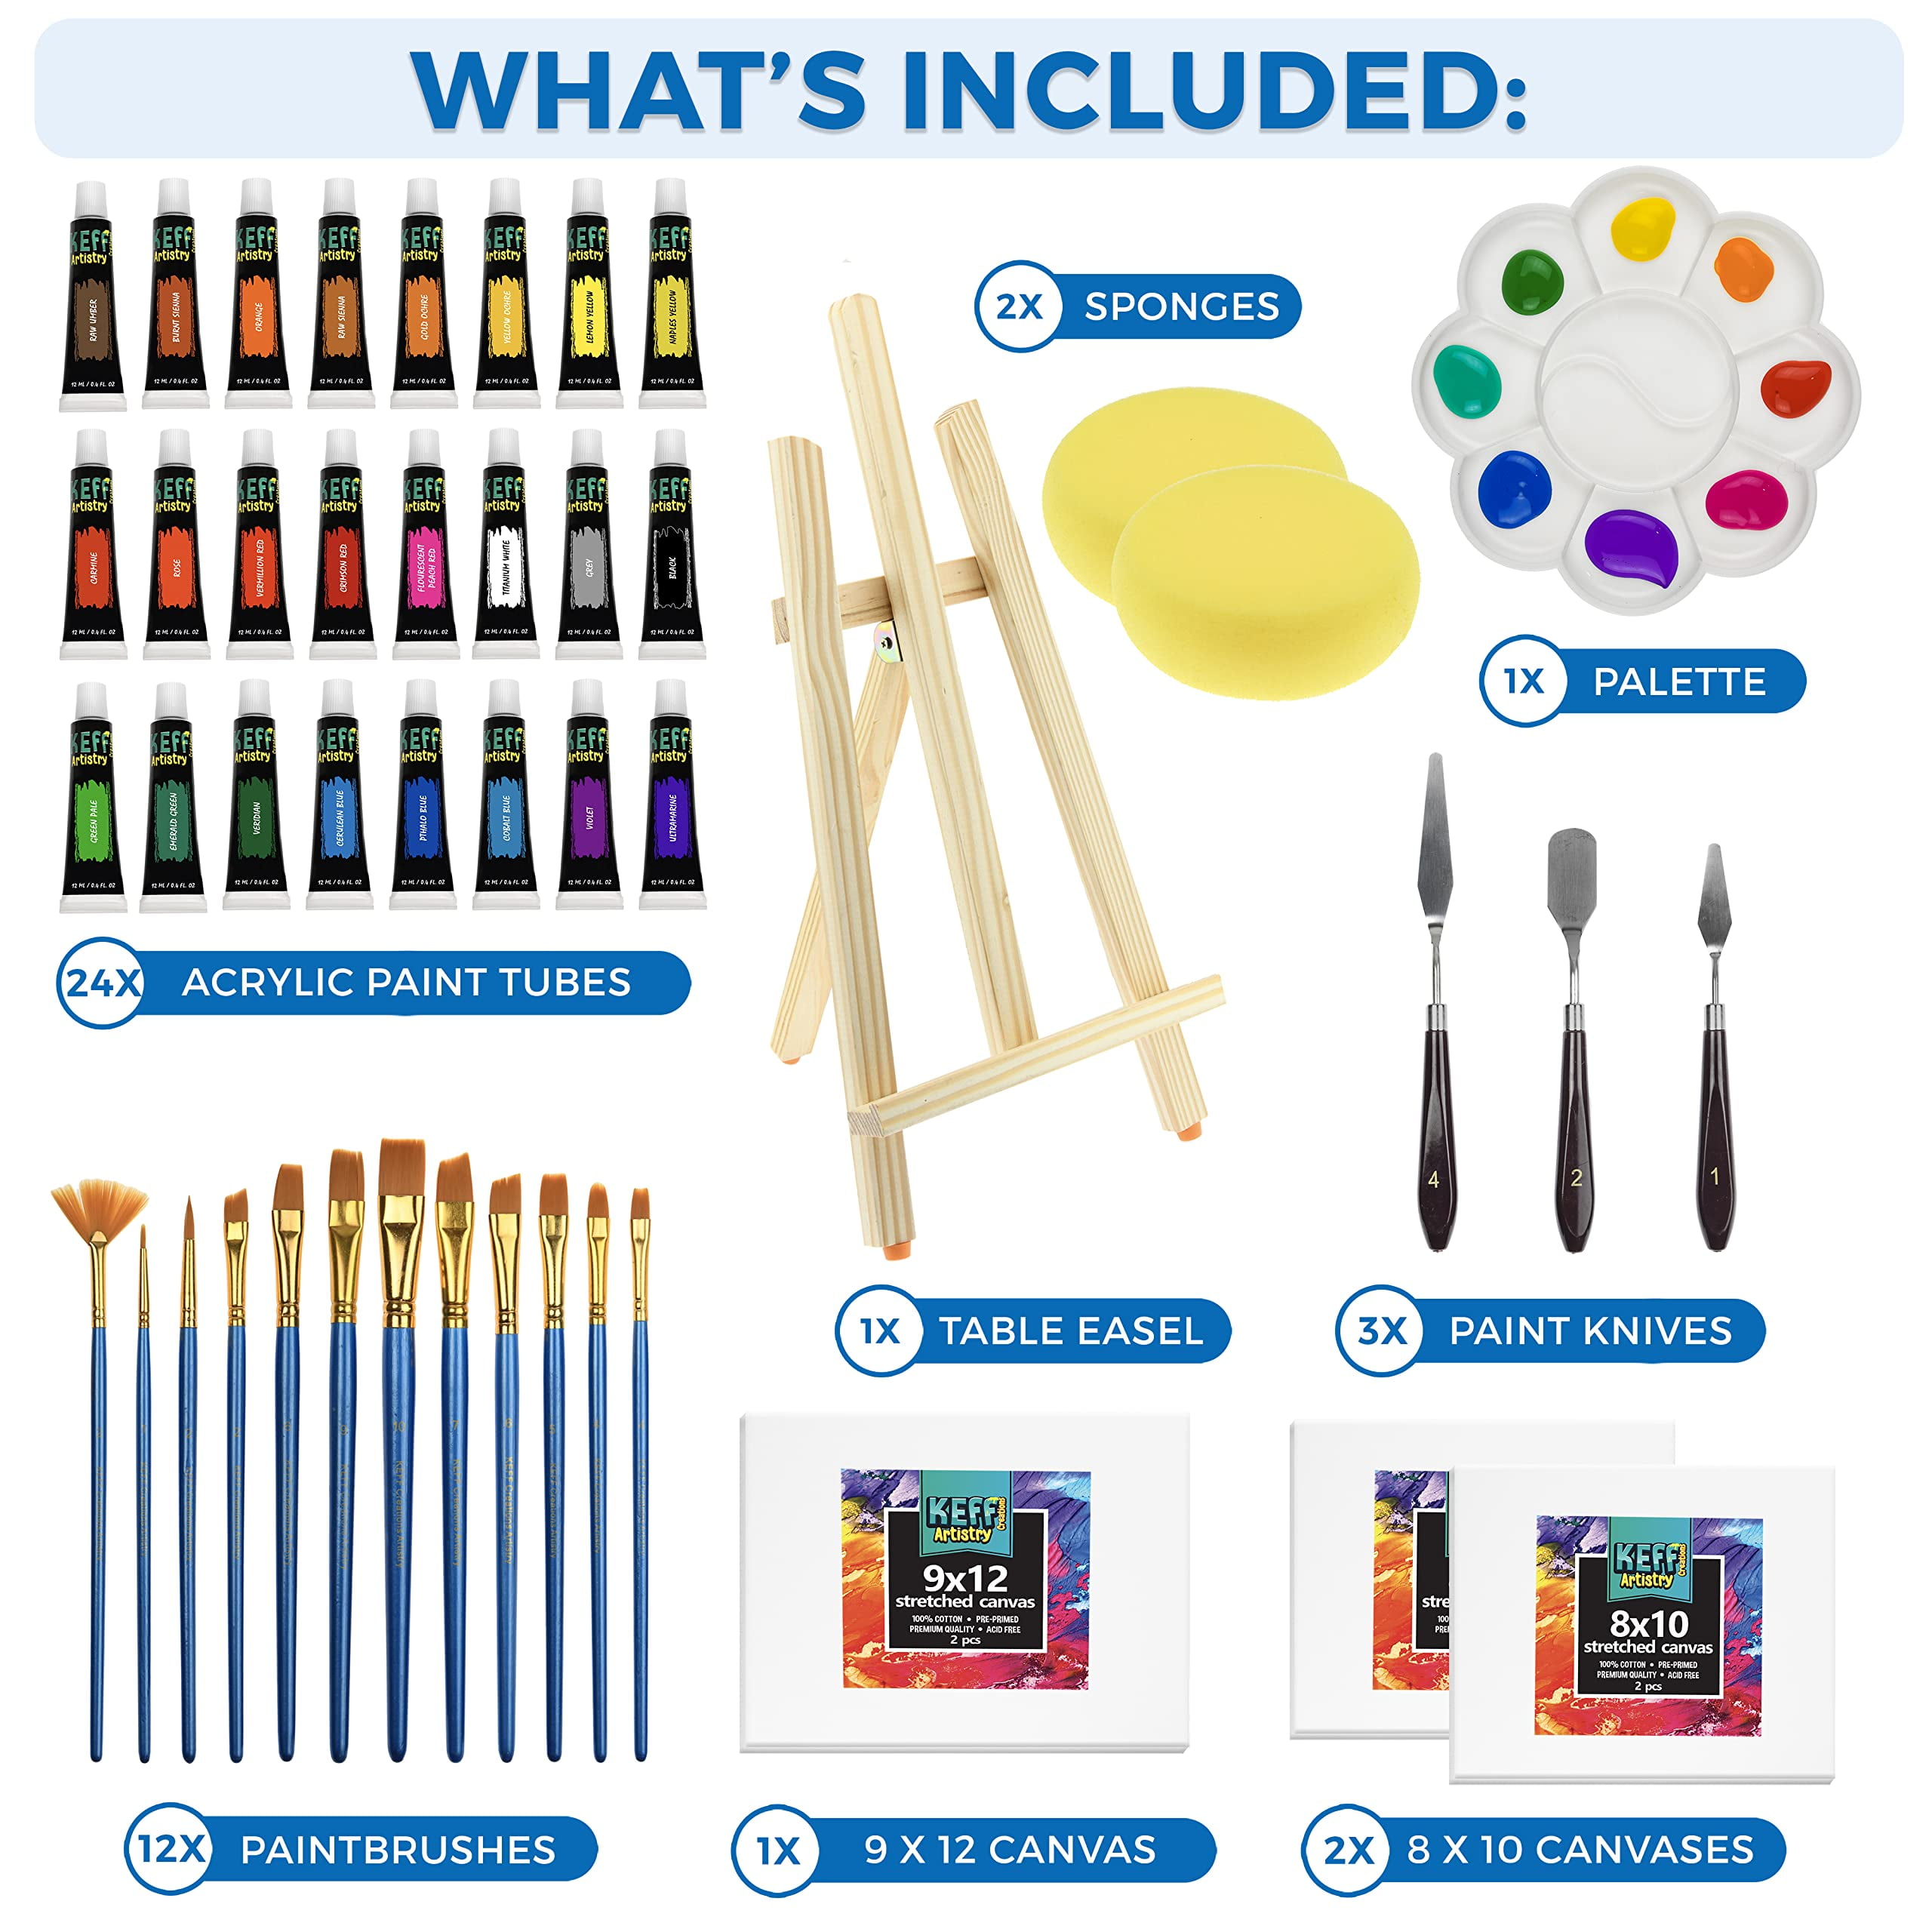 KEFF Large Deluxe Art Painting Supplies Set - 140-Piece Professional Paint  Kit for Adults & Kids with Acrylic, Watercolor & Oil Paints, Aluminum Field